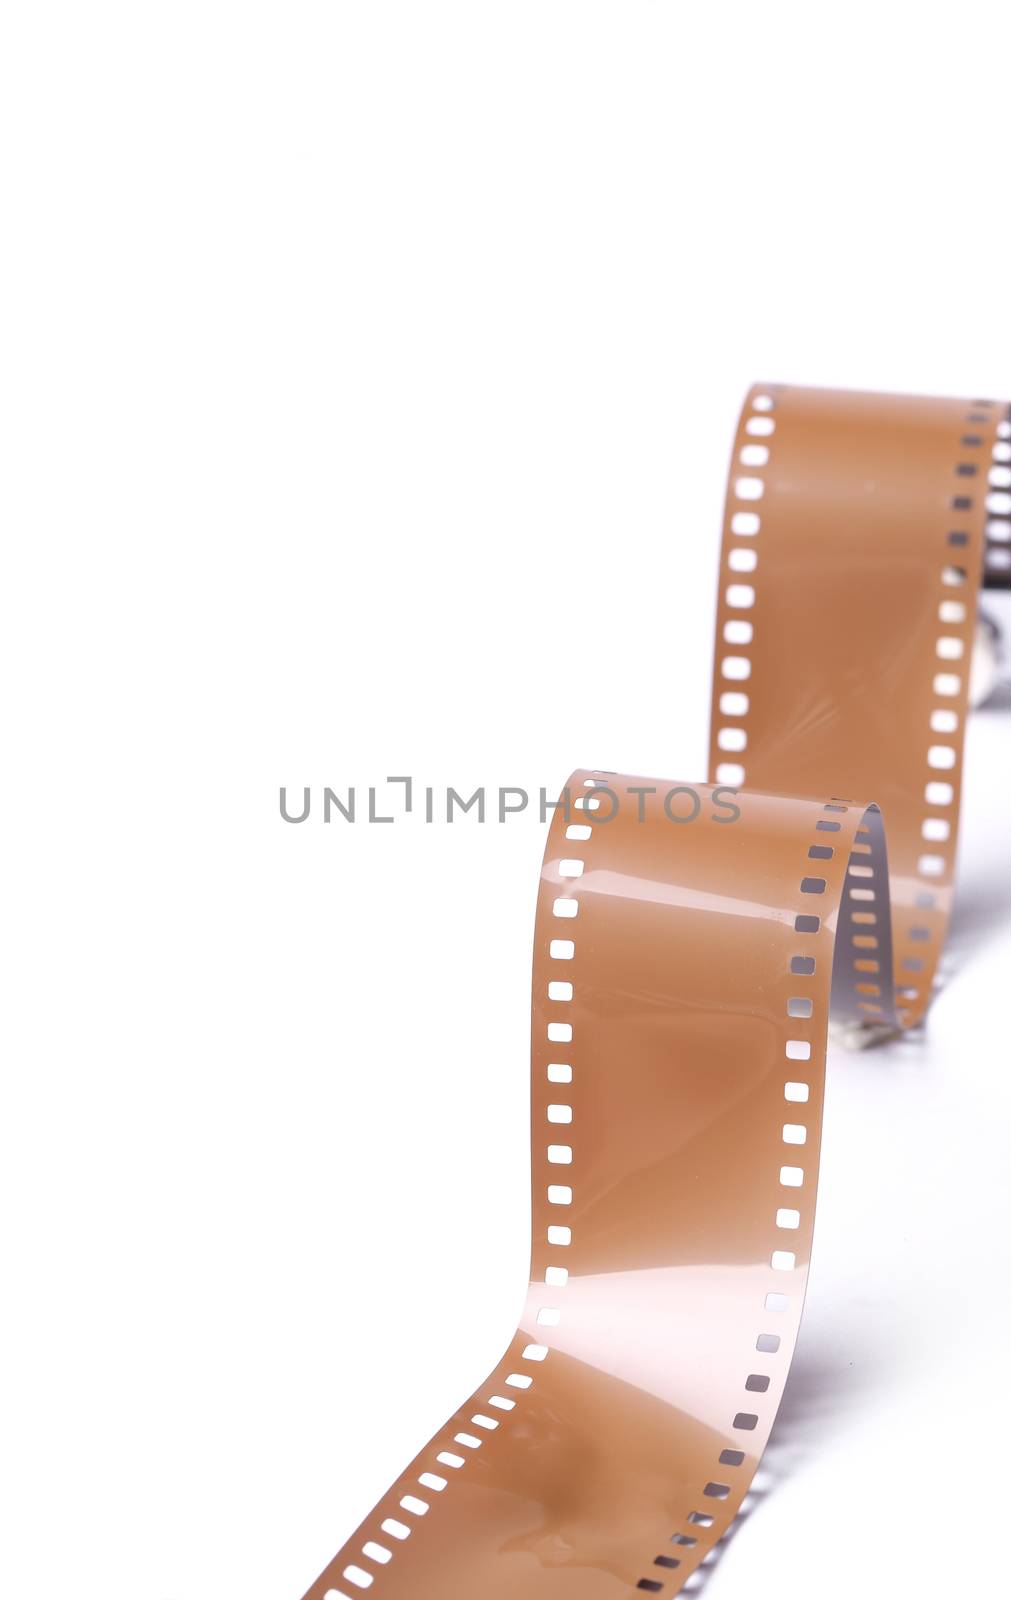 Cinematography. Vintage tape on a white background